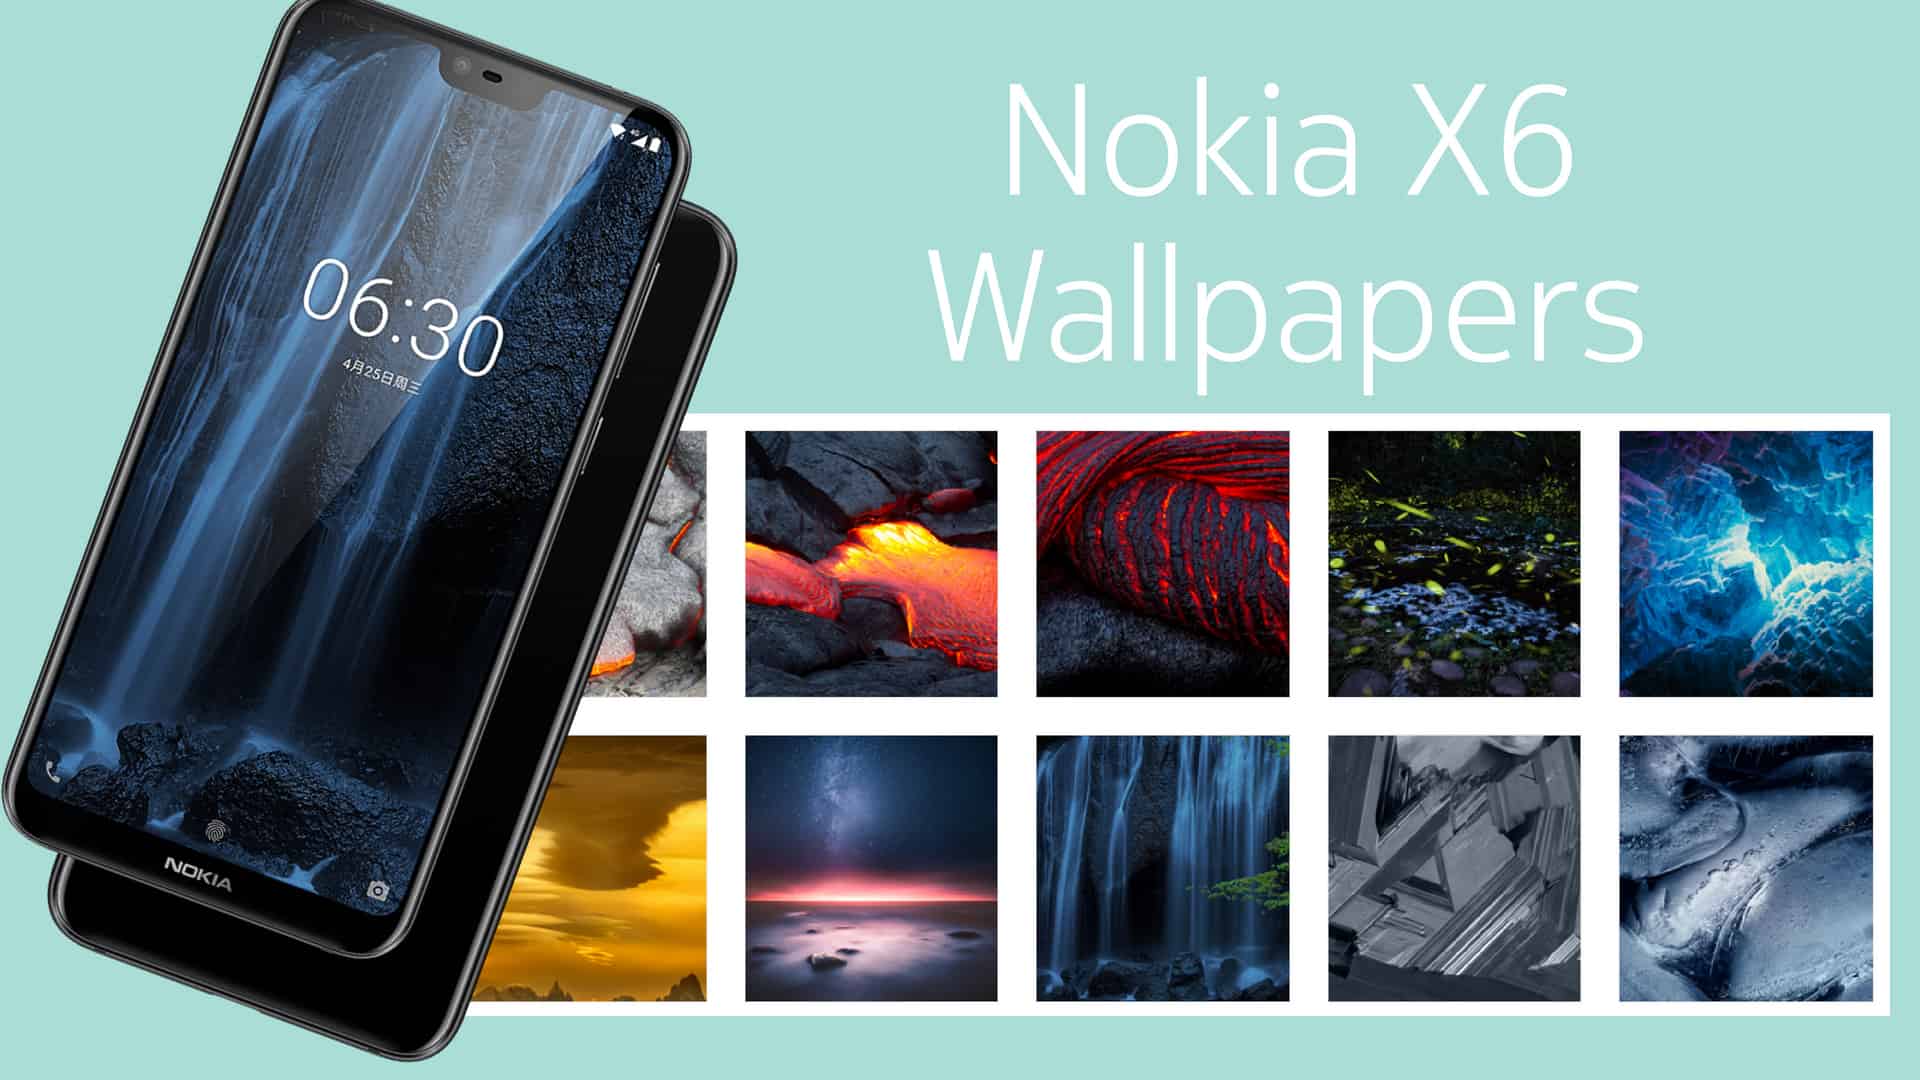 Download original (stock) wallpapers from Nokia X6 in HD quality